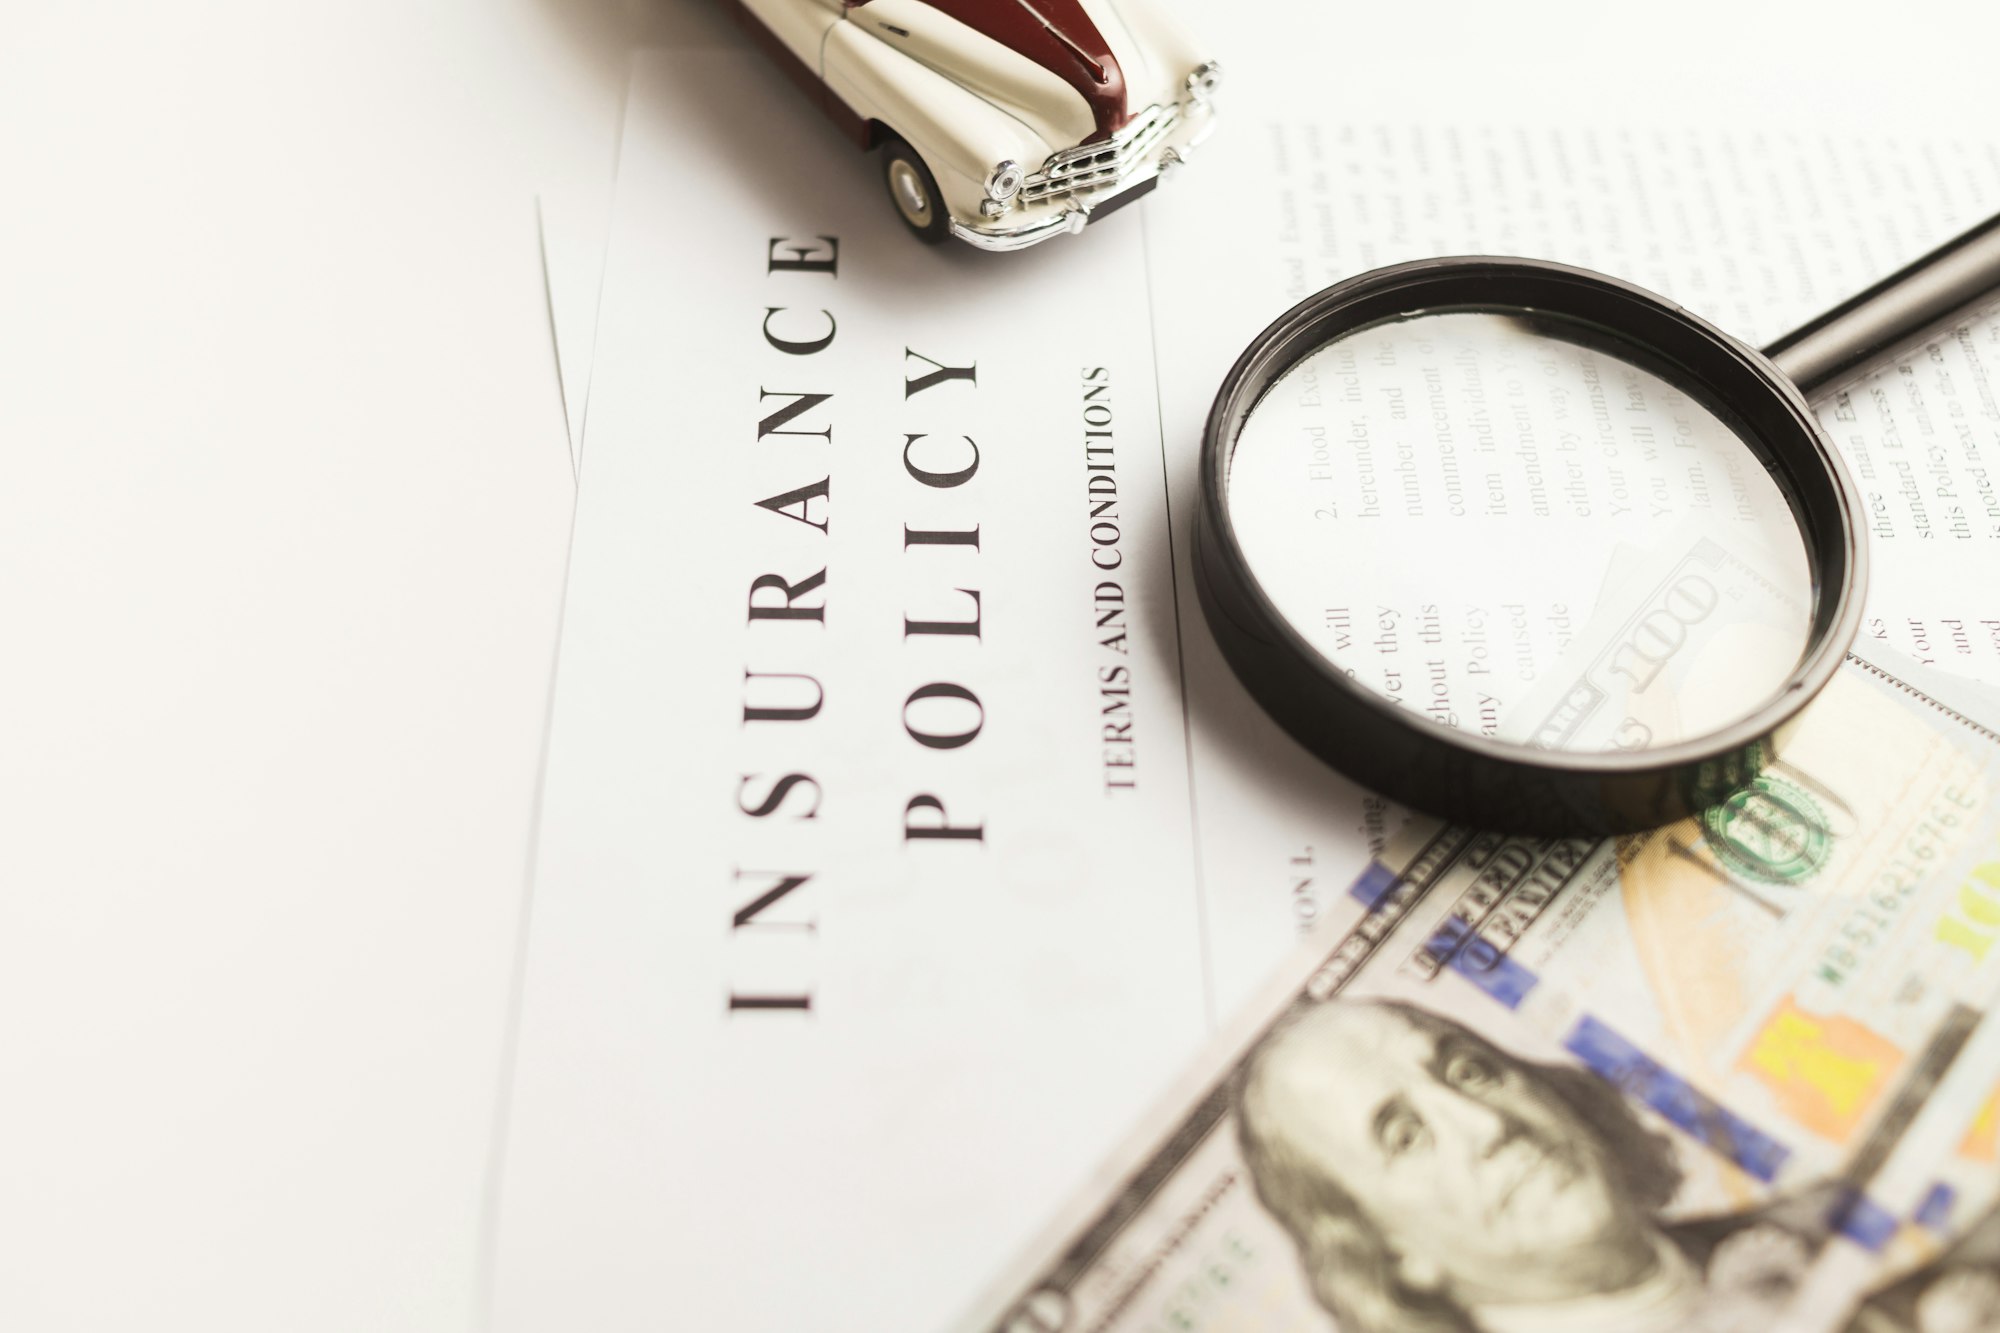 What Is the Purpose of a Disclosure Statement in Life Insurance Policies?